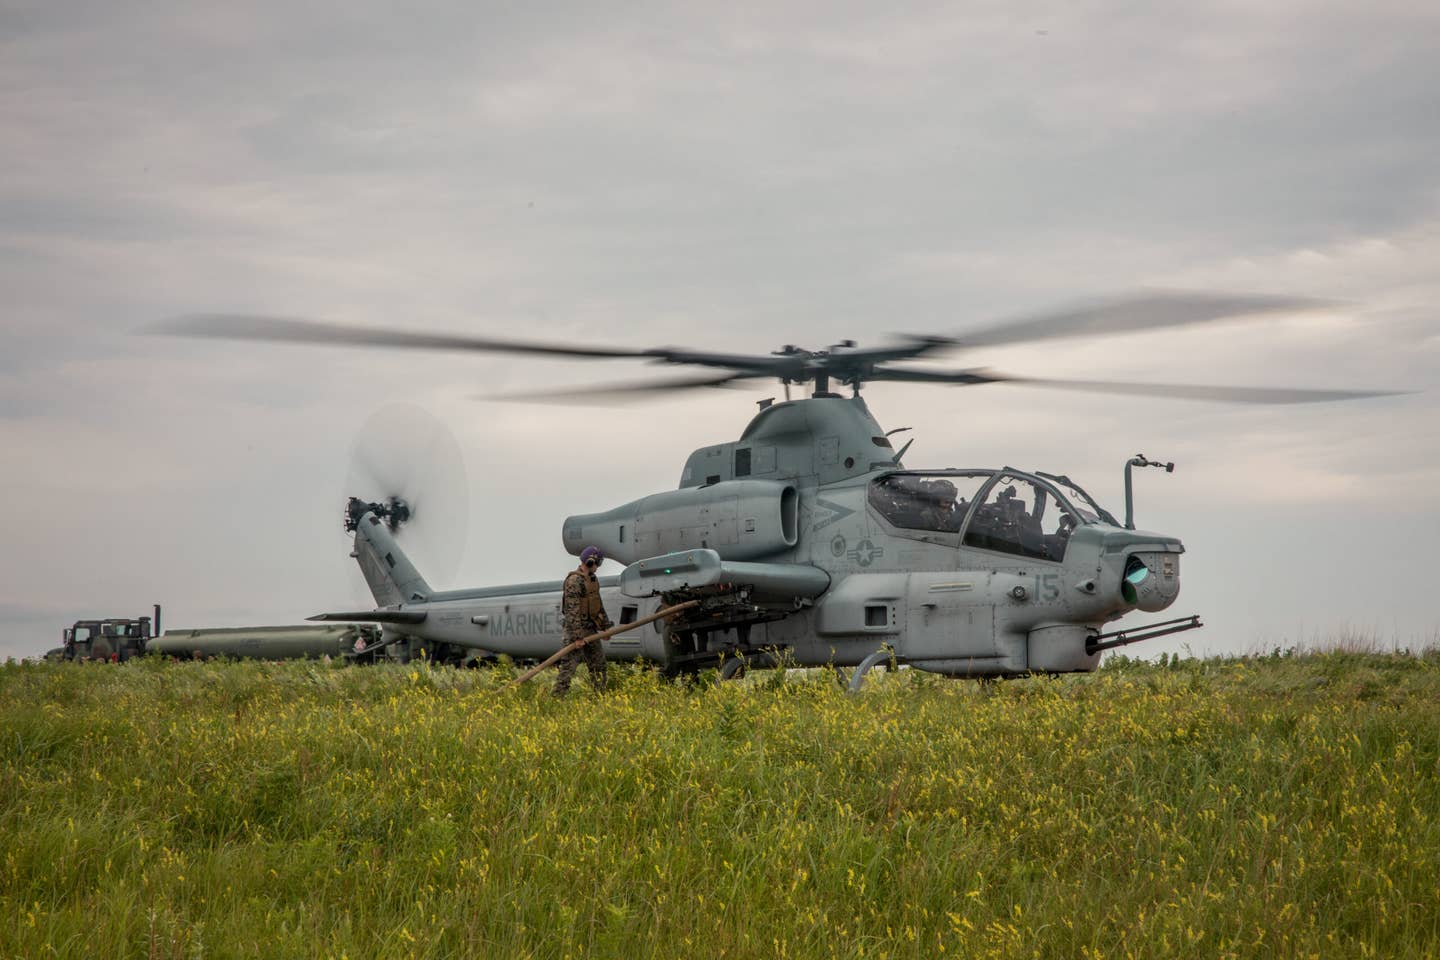 A U.S. Marine Corps AH-1Z Viper from Marine Light Attack Helicopter Squadron (HMLA) 773 Detachment A, 4th Marine Aircraft Wing, receives refueling within a Forward Arming and Refueling Point (FARP) at exercise Gunslinger 22 in Salina, Kansas, June 22, 2022. (U.S. Marine Corps photo by Lance Cpl. David Intriago)